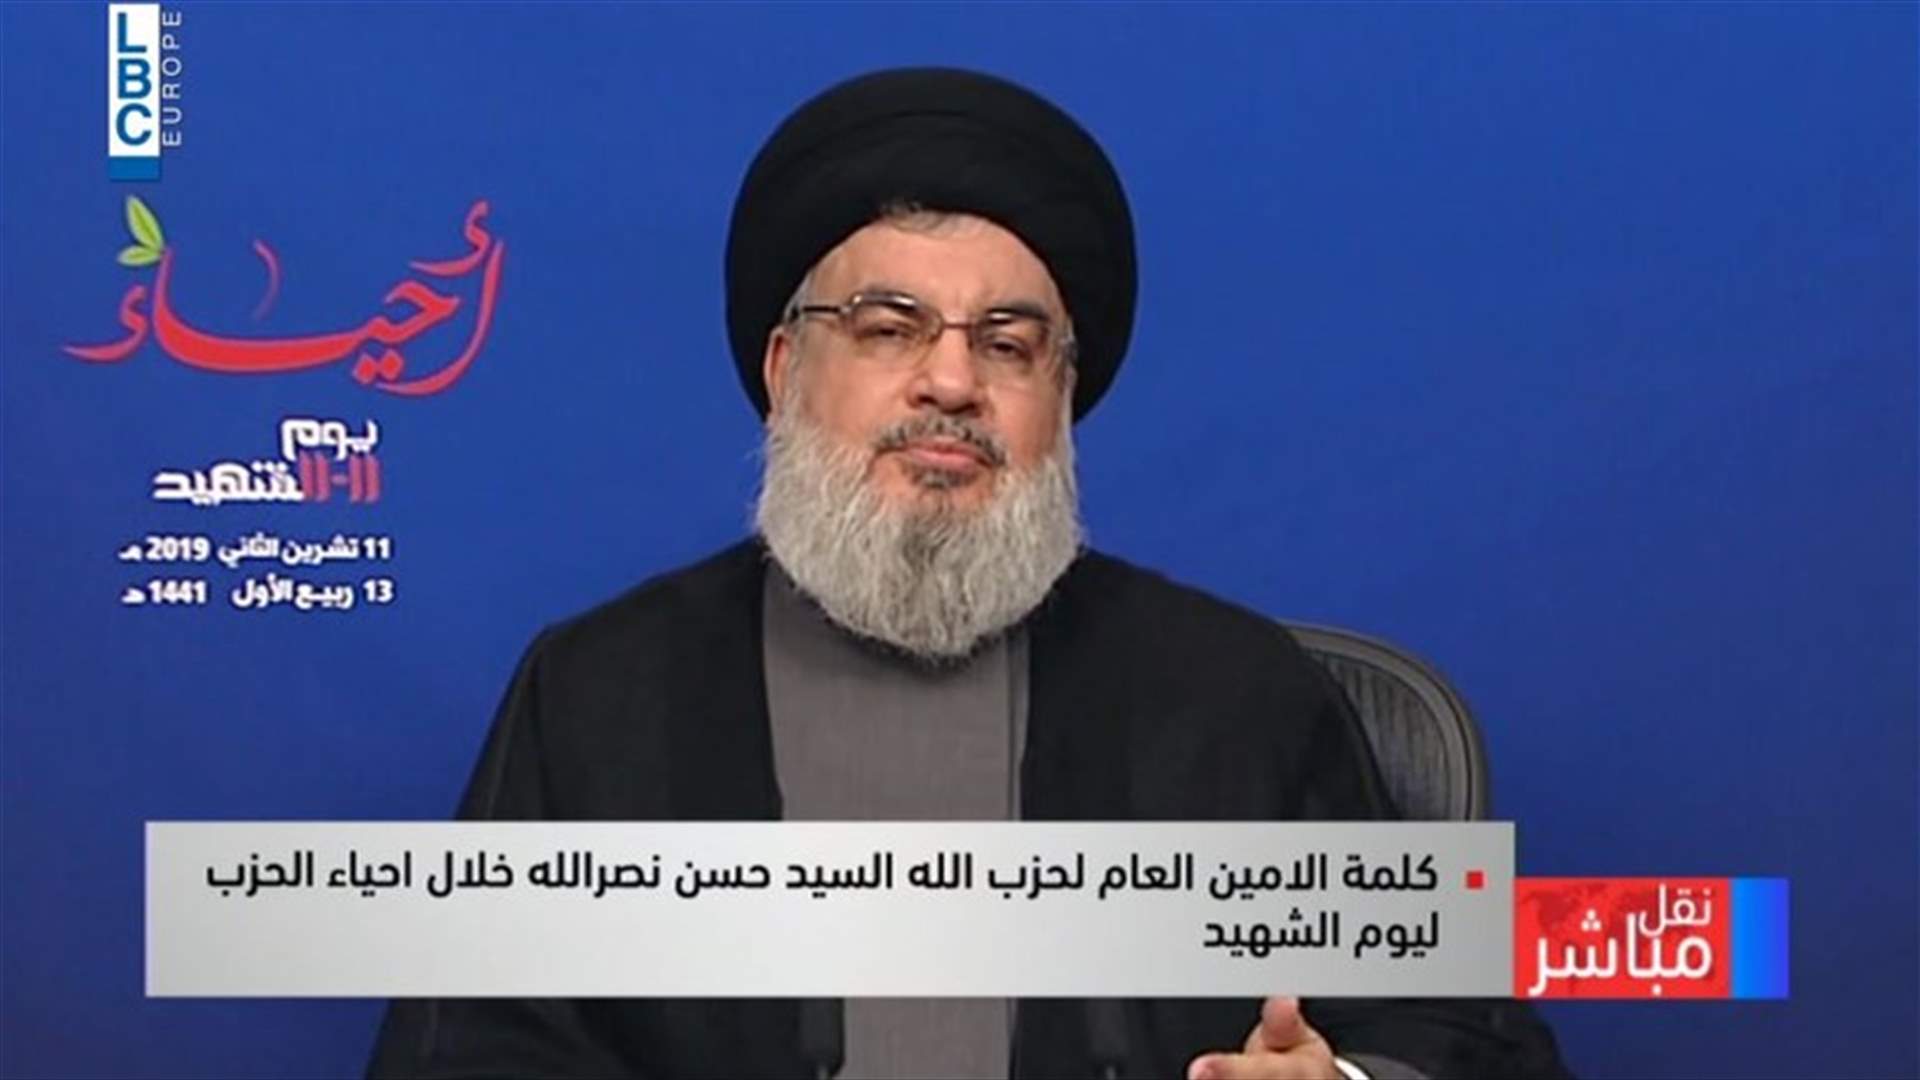 Nasrallah: Reports that Lebanon is not a safe country are lies fabricated by US